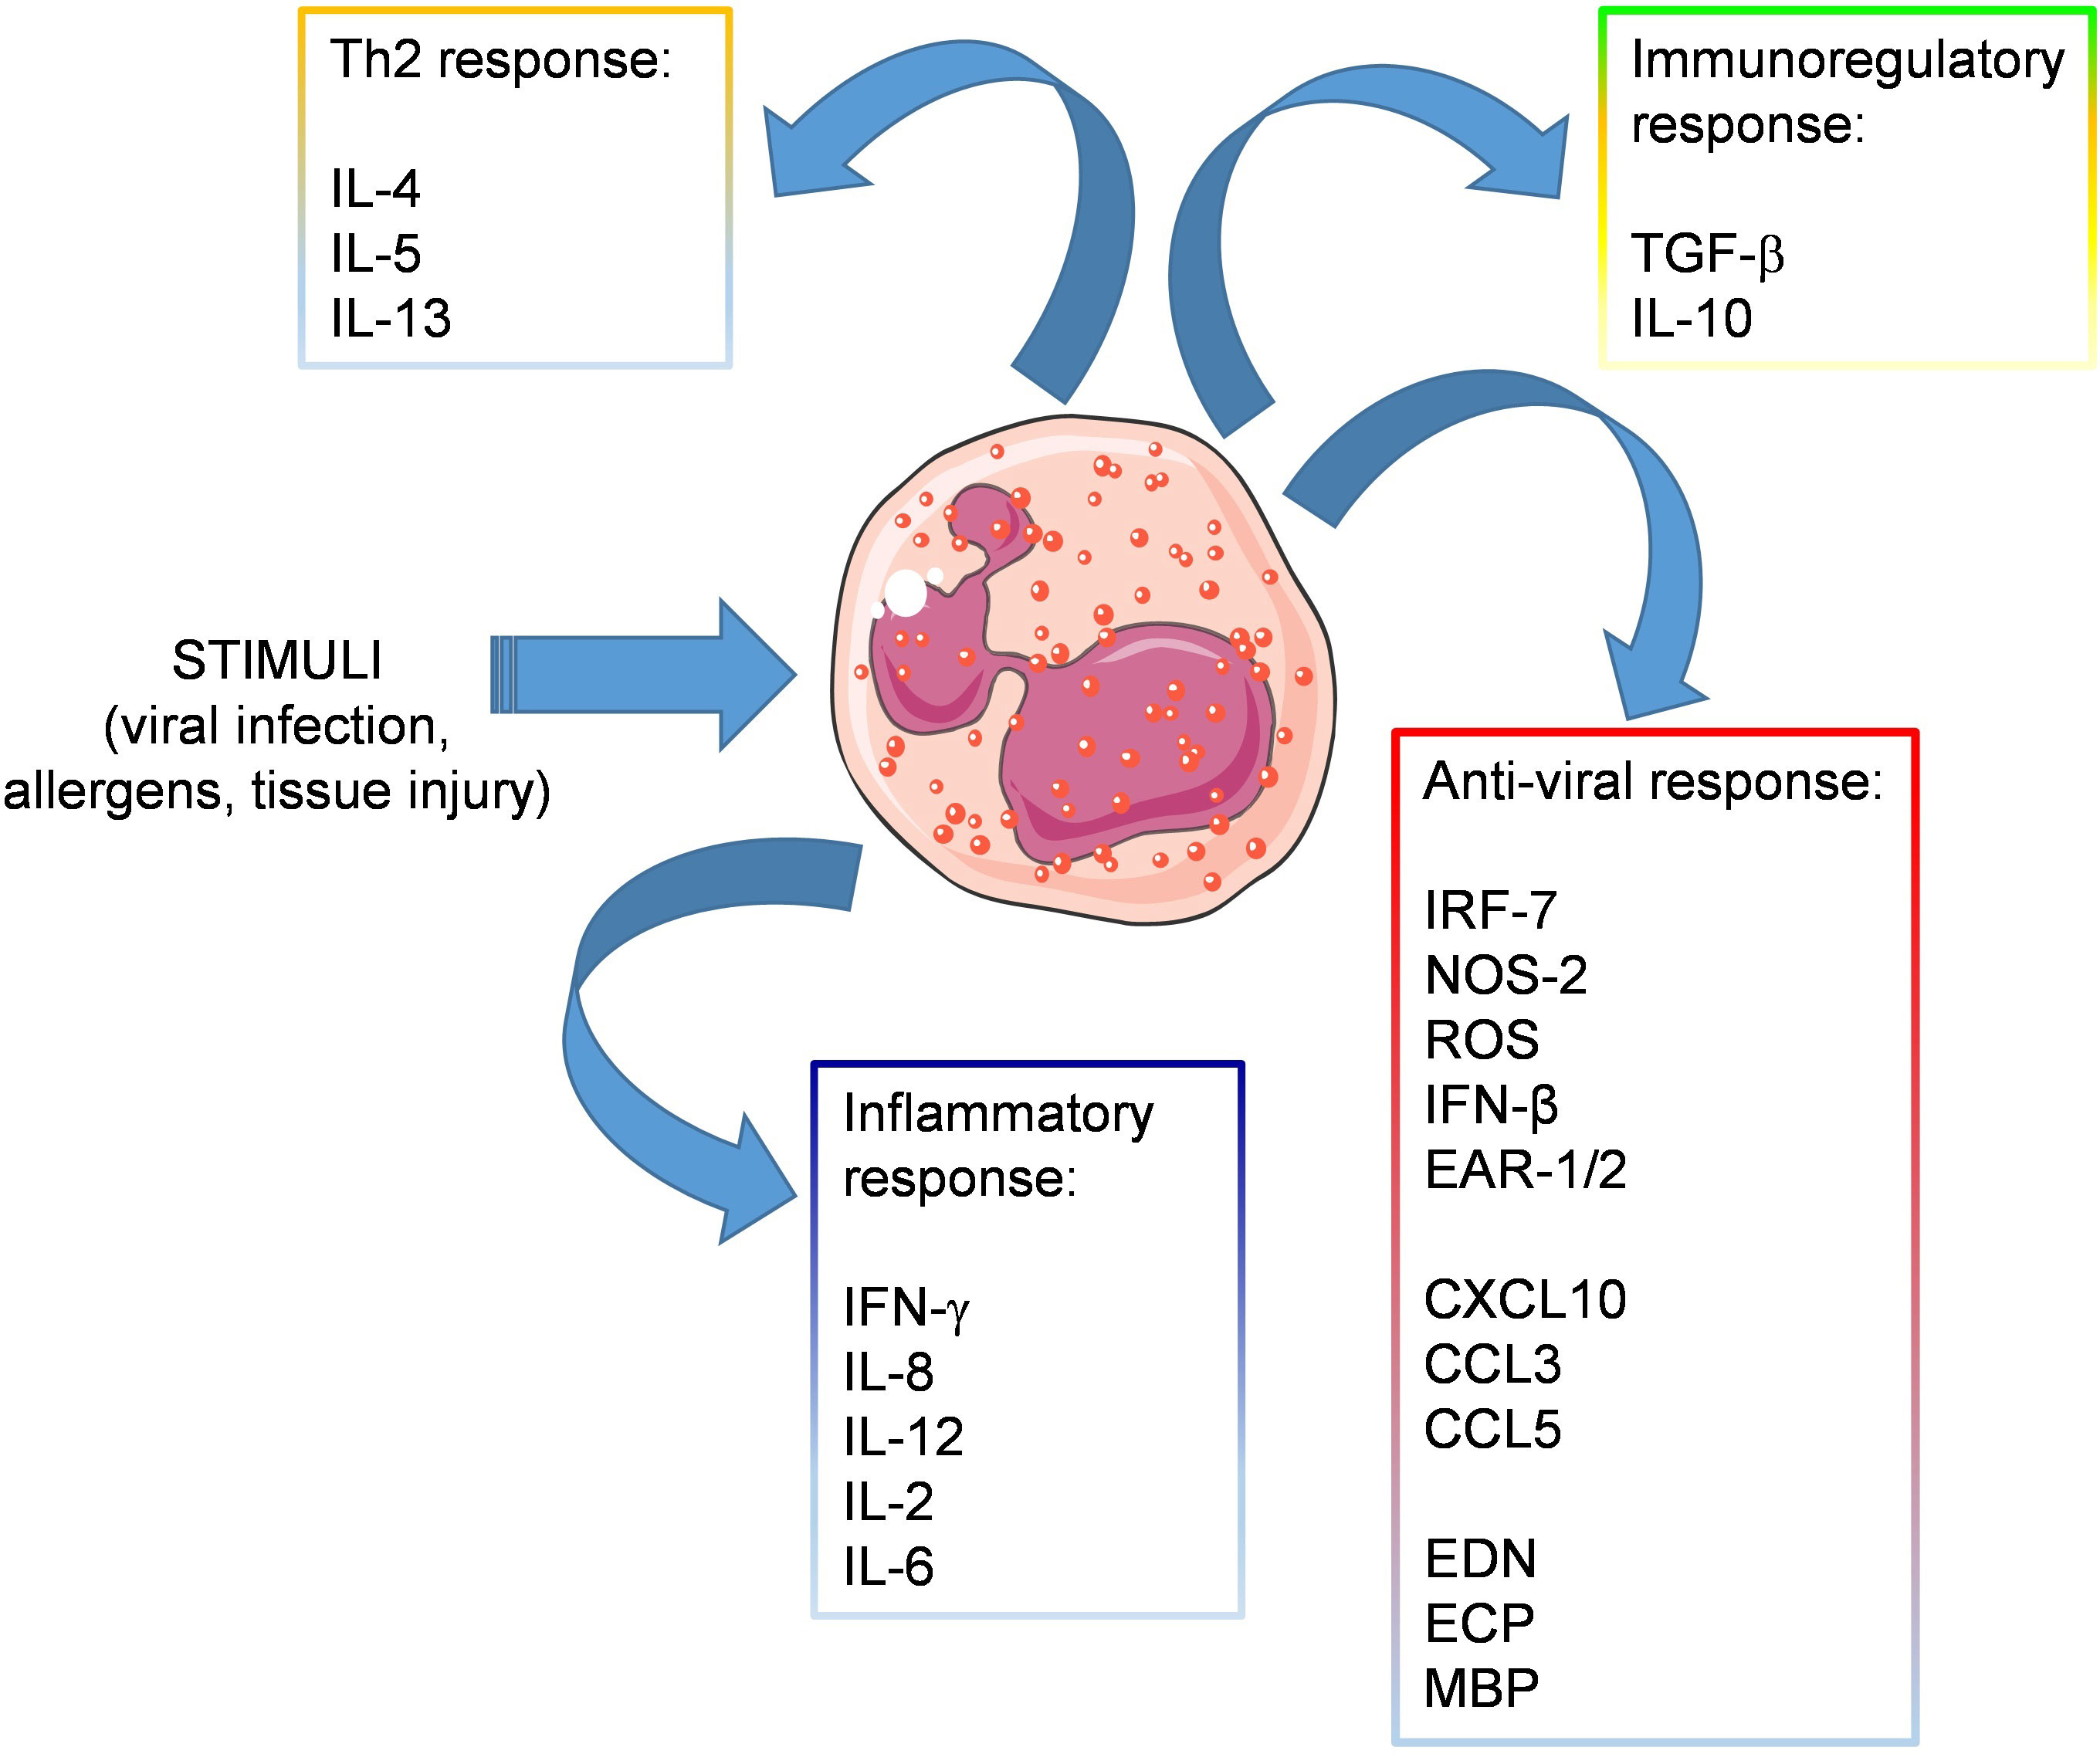 Frontiers | Eosinophils as potential biomarkers in respiratory